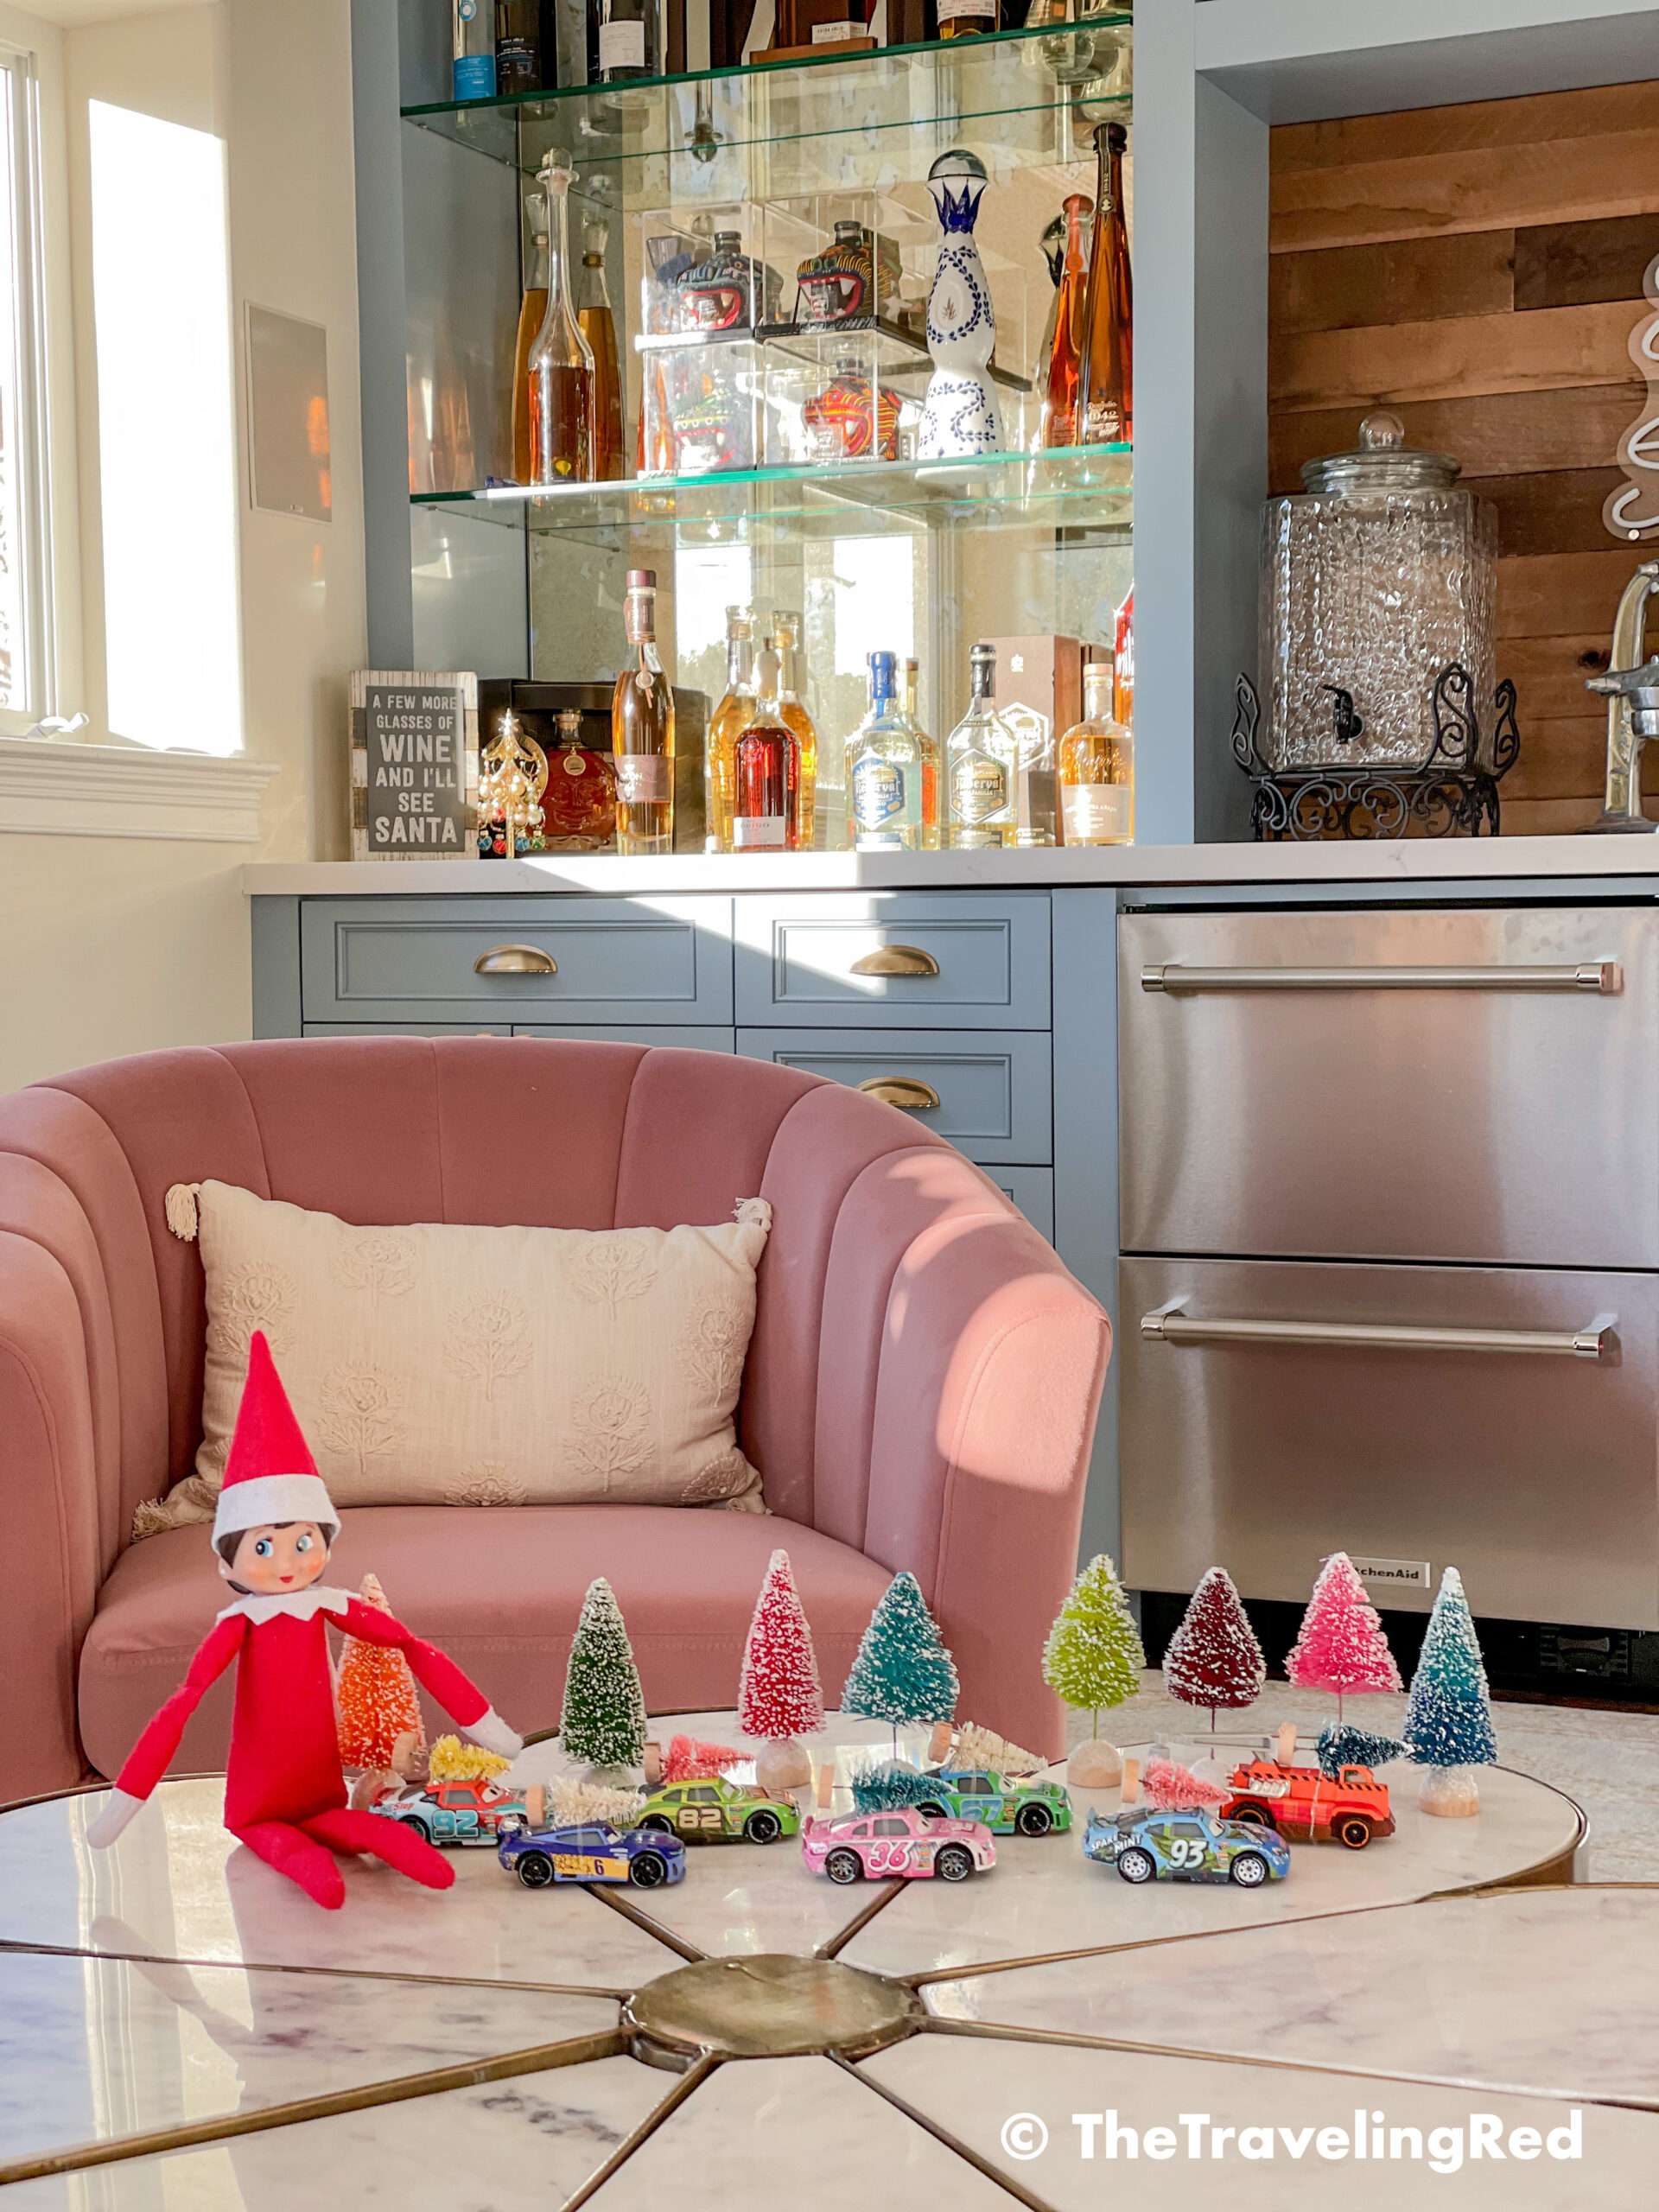 Naughty Elf on the shelf put tiny bottle bruch Christmas trees on all of the toy cars. Fun and easy elf on the shelf ideas for a naughty elf that are quick and easy using things you have at home.